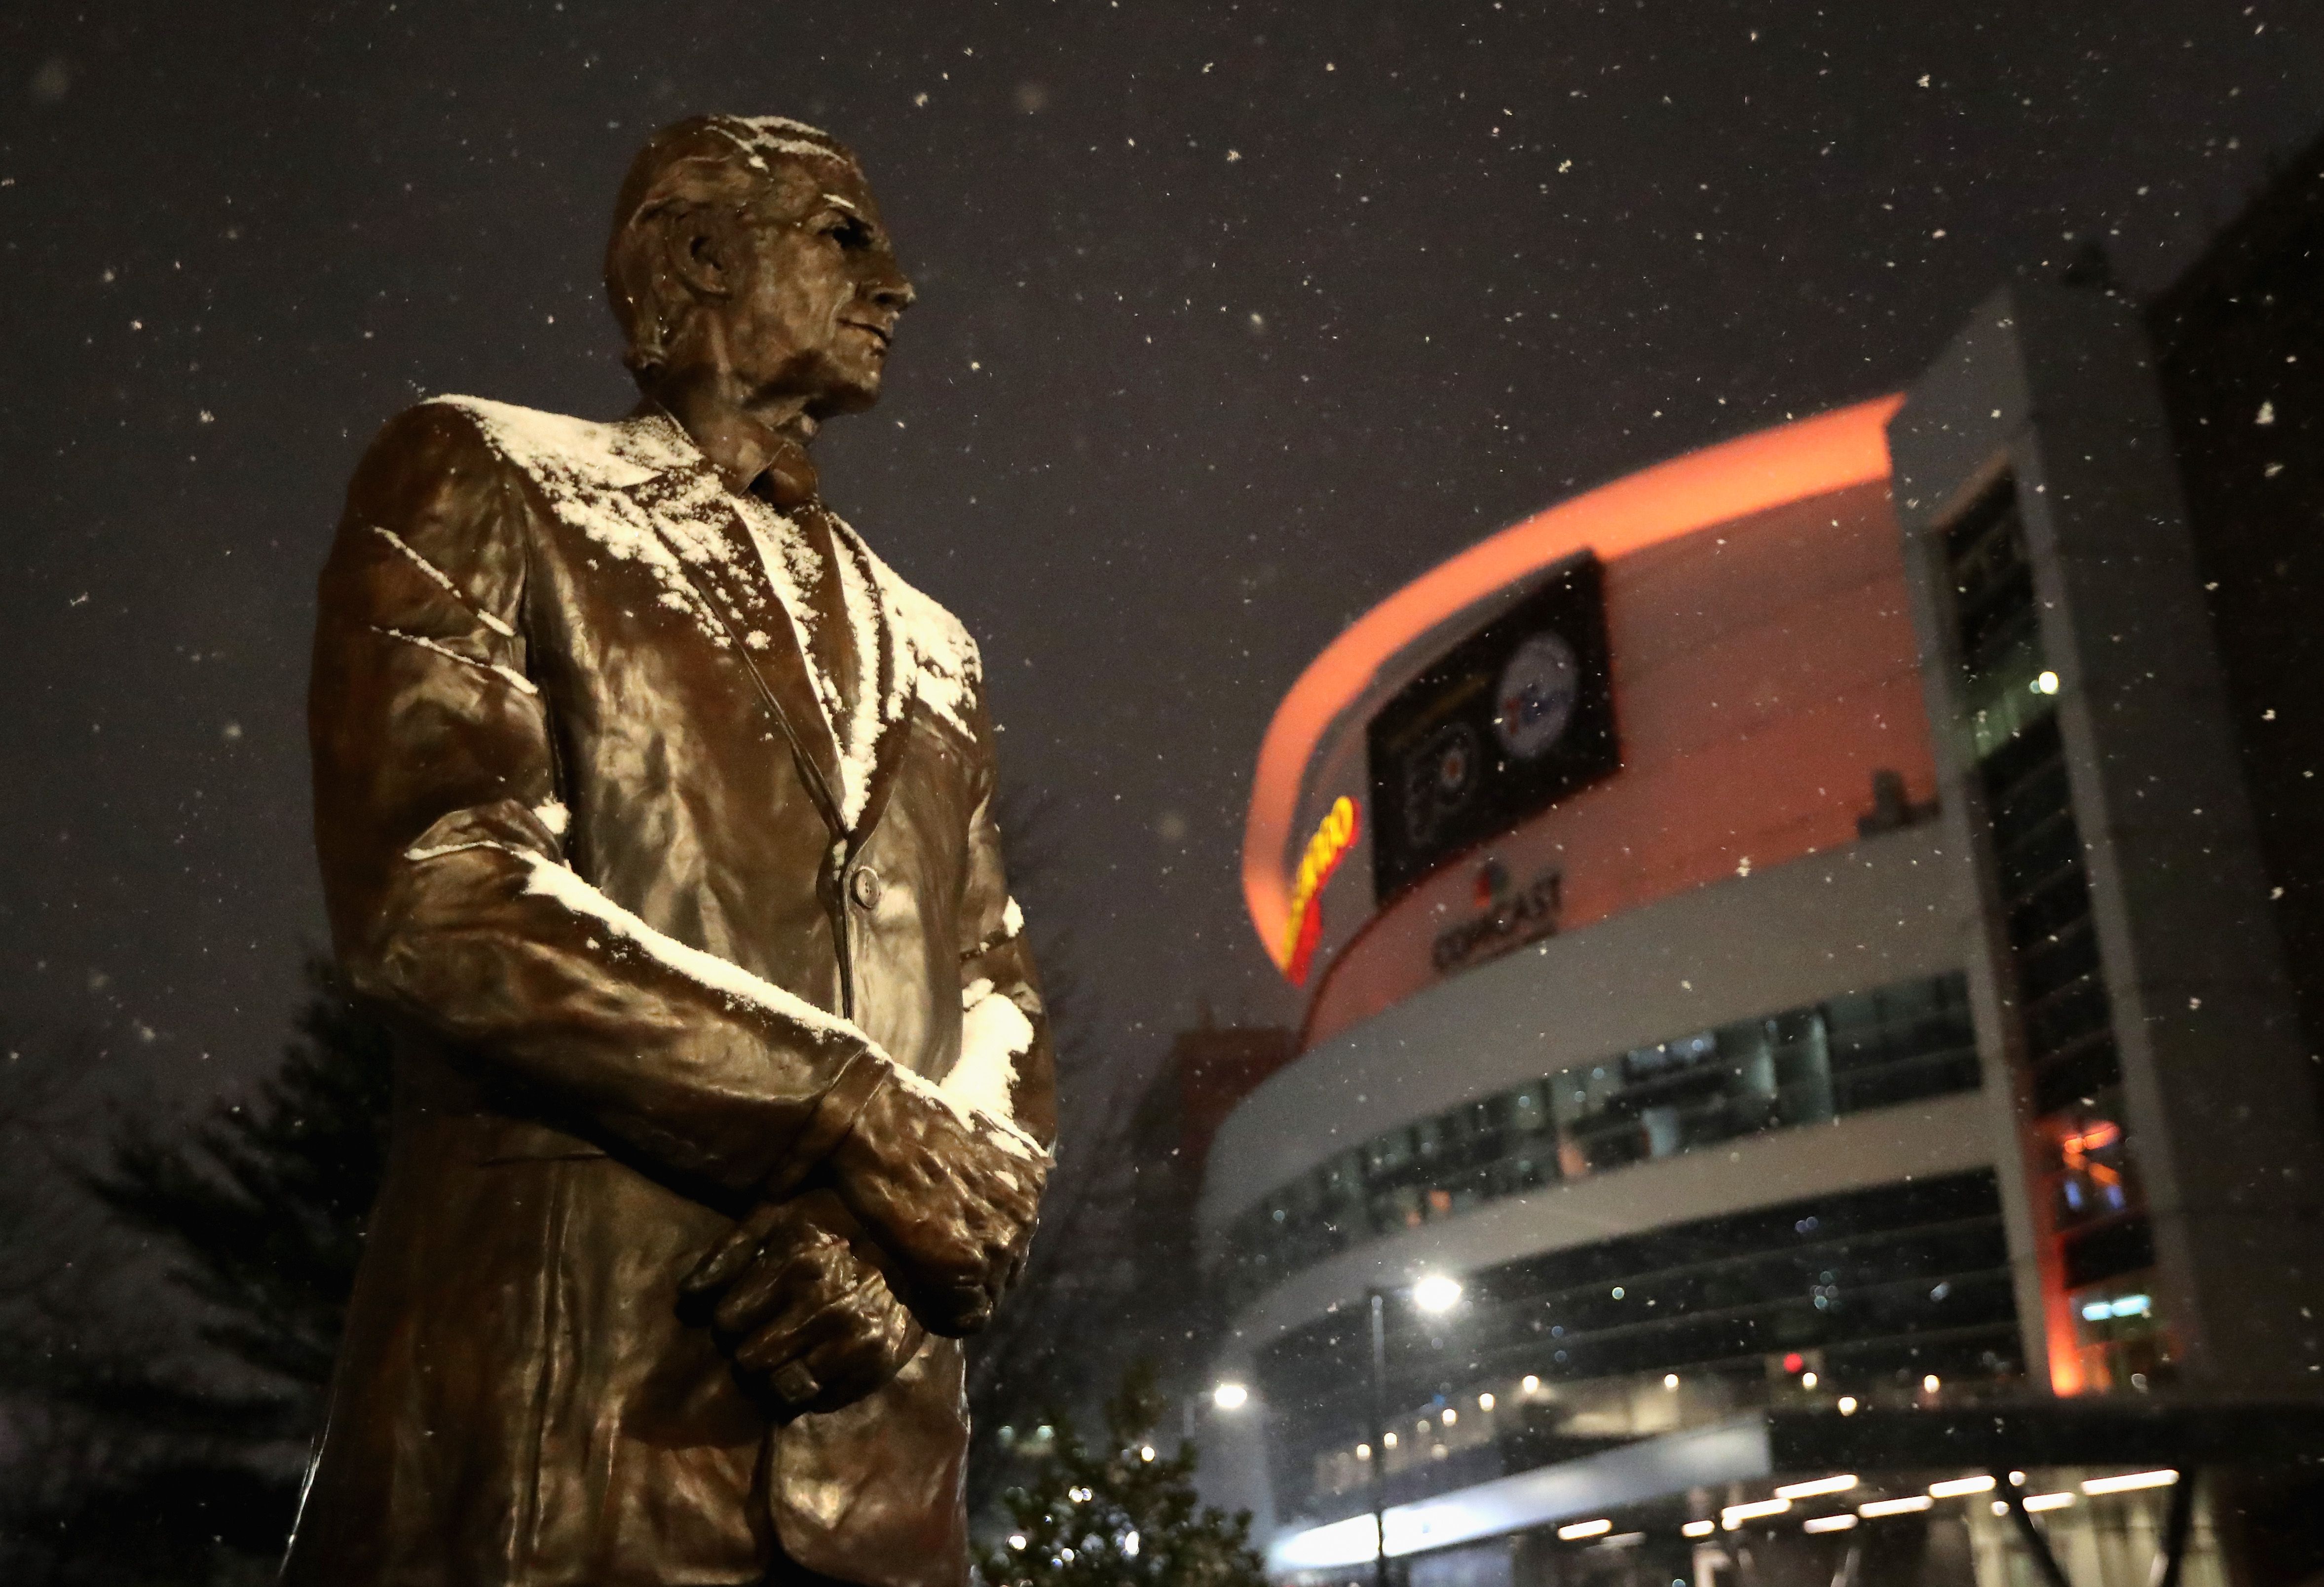 Snow falls on the statue of former Philadelphia Flyers owner and COO Ed Snider at the Wells Fargo Center on January 31, 2021 in Philadelphia, Pennsylvania. 